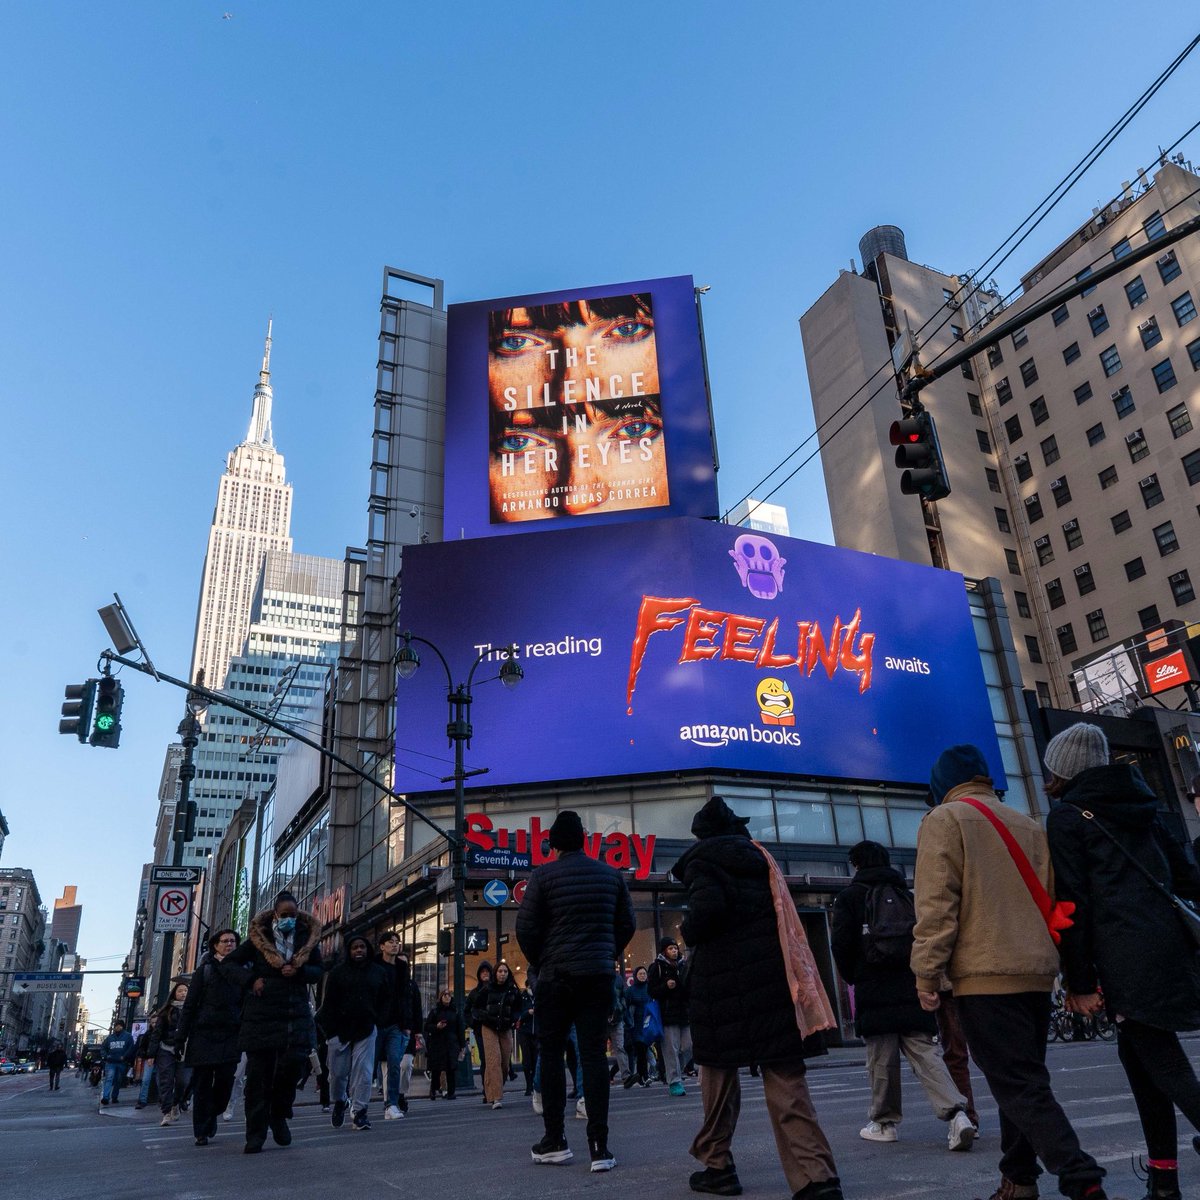 This is a dream come true! I’m thrilled to share that The Silence in Her Eyes is on the @amazonbooks billboard in NYC! Check out my new book here: bit.ly/42Jc25I #thatreadingfeelingawaits